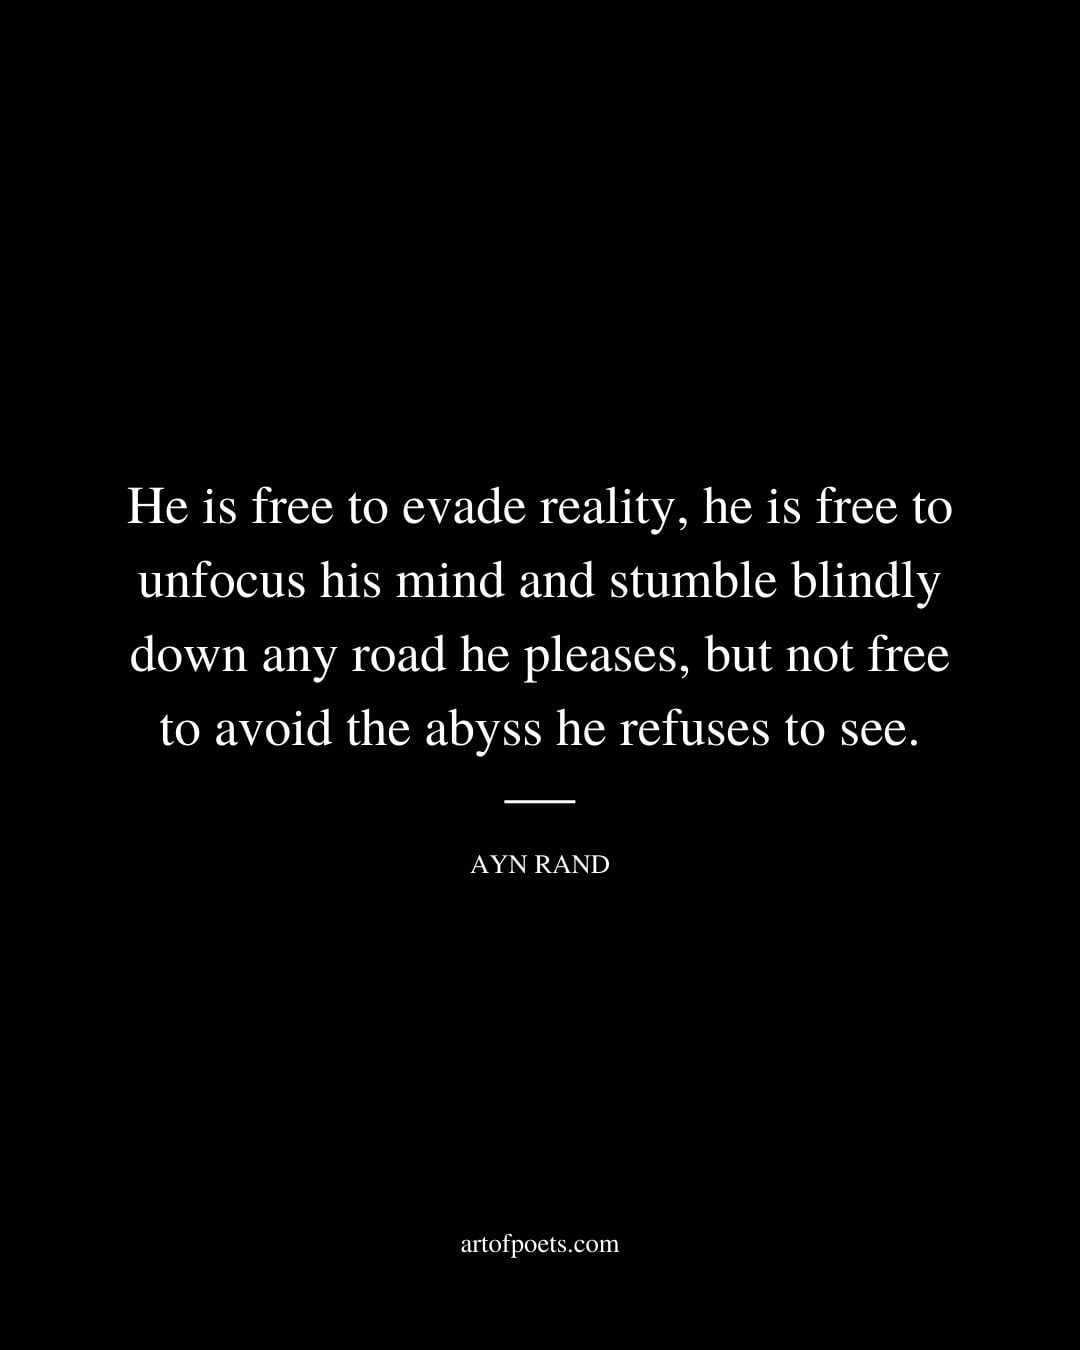 He is free to evade reality he is free to unfocus his mind and stumble blindly down any road he pleases but not free to avoid the abyss he refuses to see